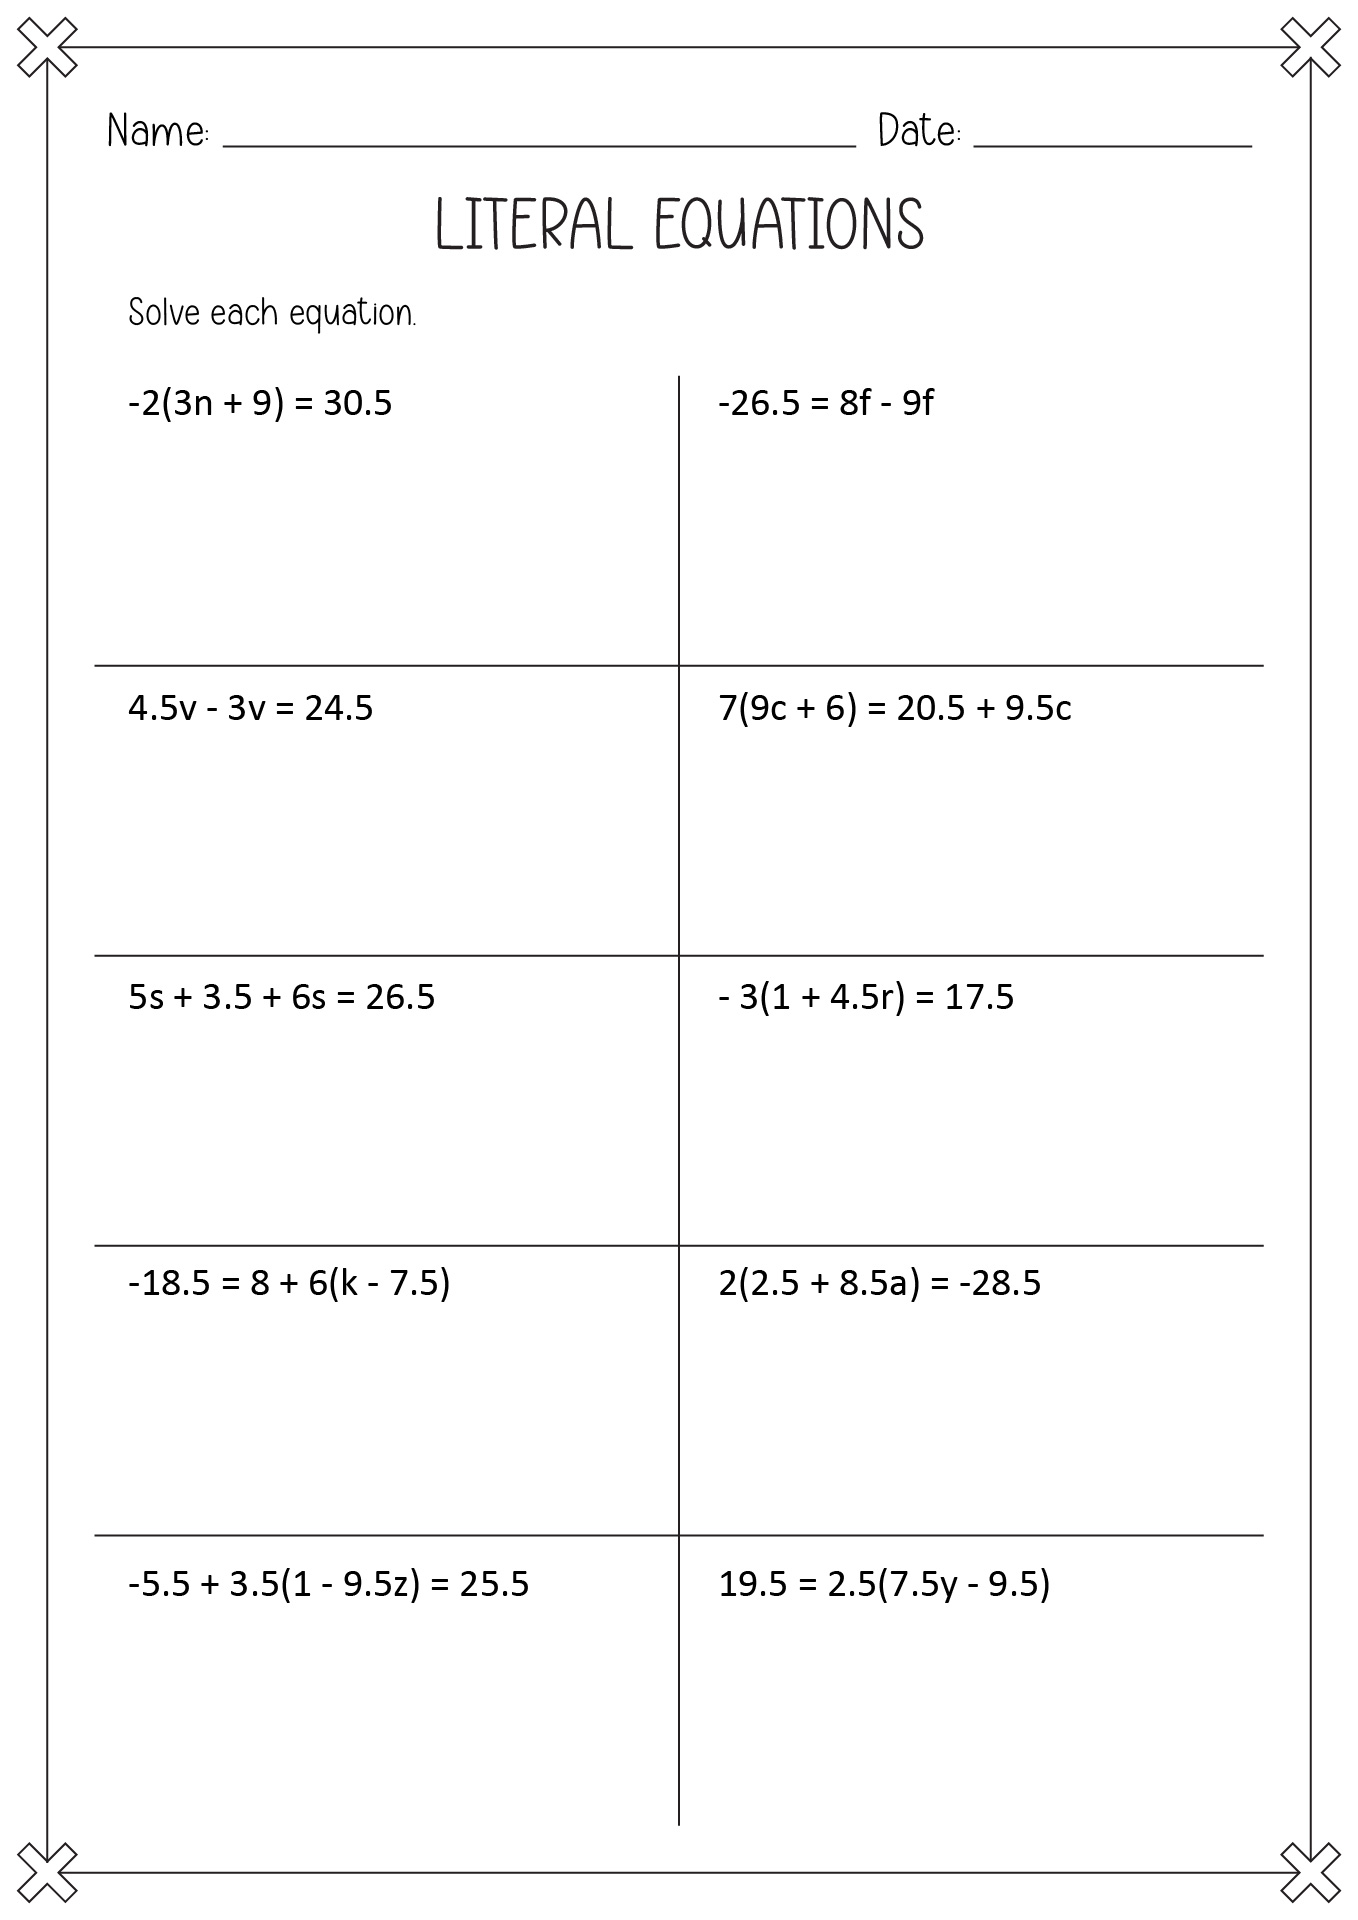 14 Best Images of Two-Step Equation Maze Worksheet - Two-Step Equation Maze Answers, Two-Step